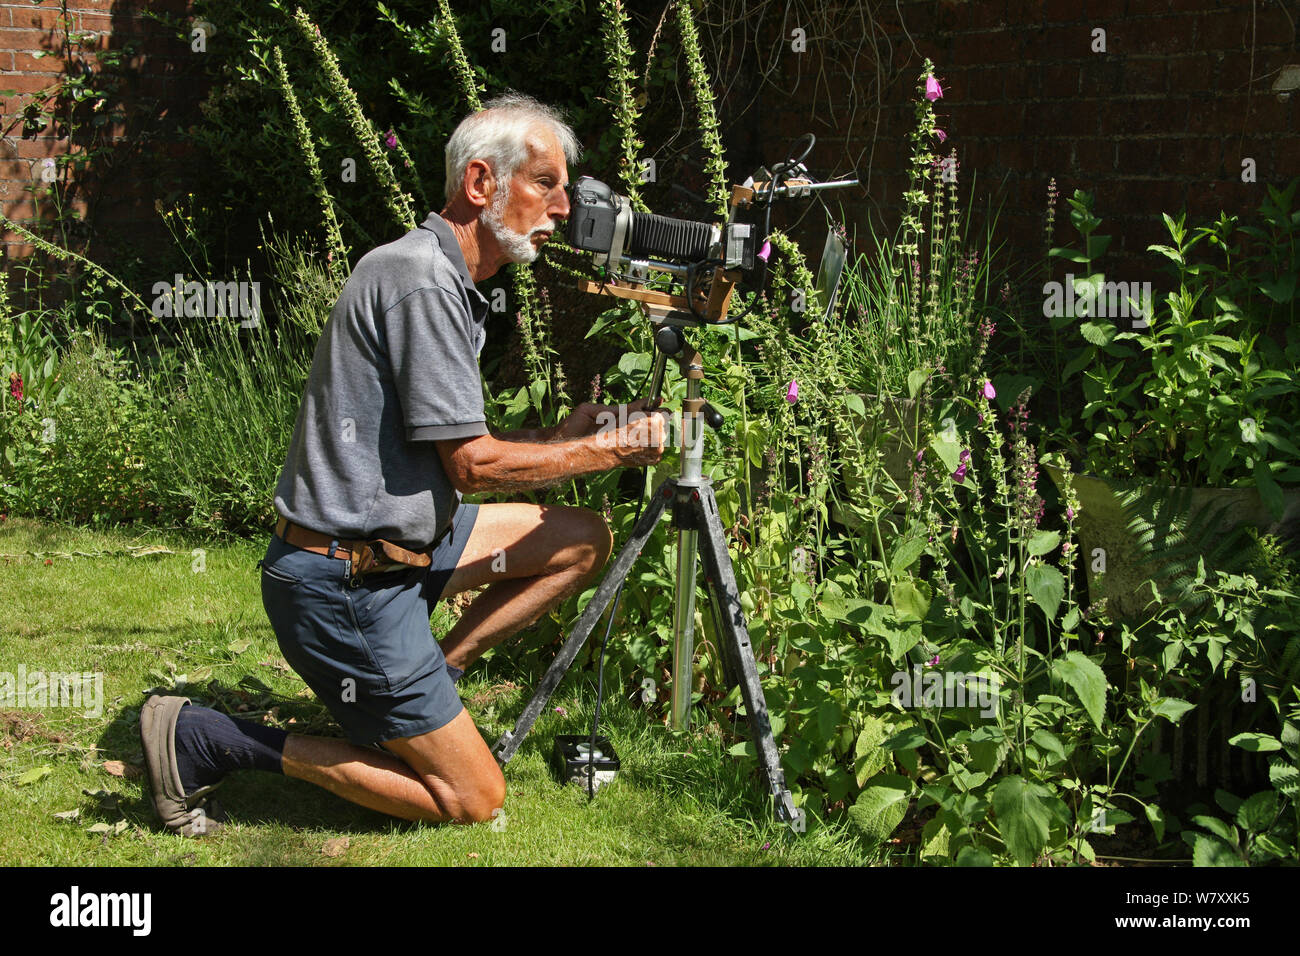 Photographer Kim Taylor using homemade camera and flash equipment for close-up photography in garden, July 2013. Stock Photo